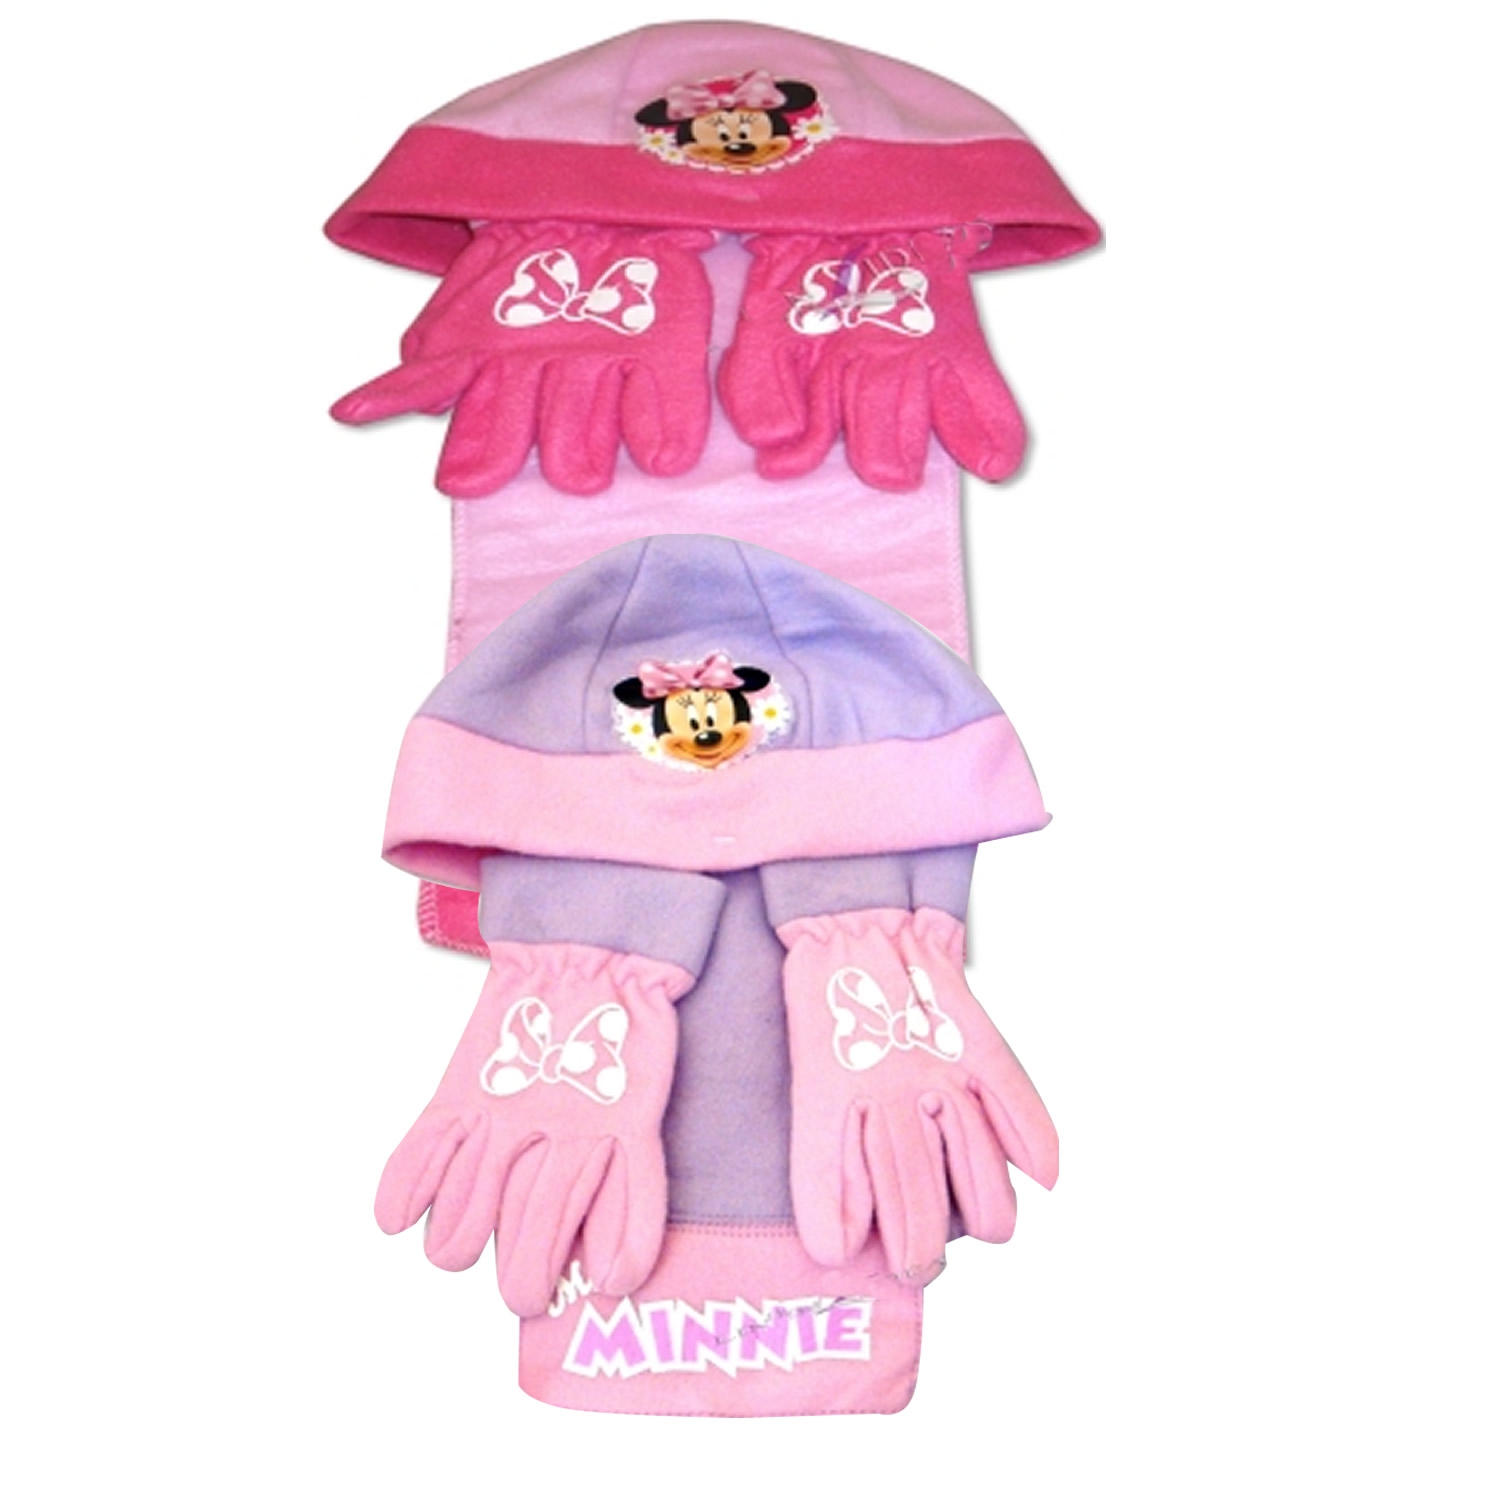 Disney Minnie Mouse 'Miss Minnie' Assorted Hat, Gloves and Scarf Set Kids Accessories